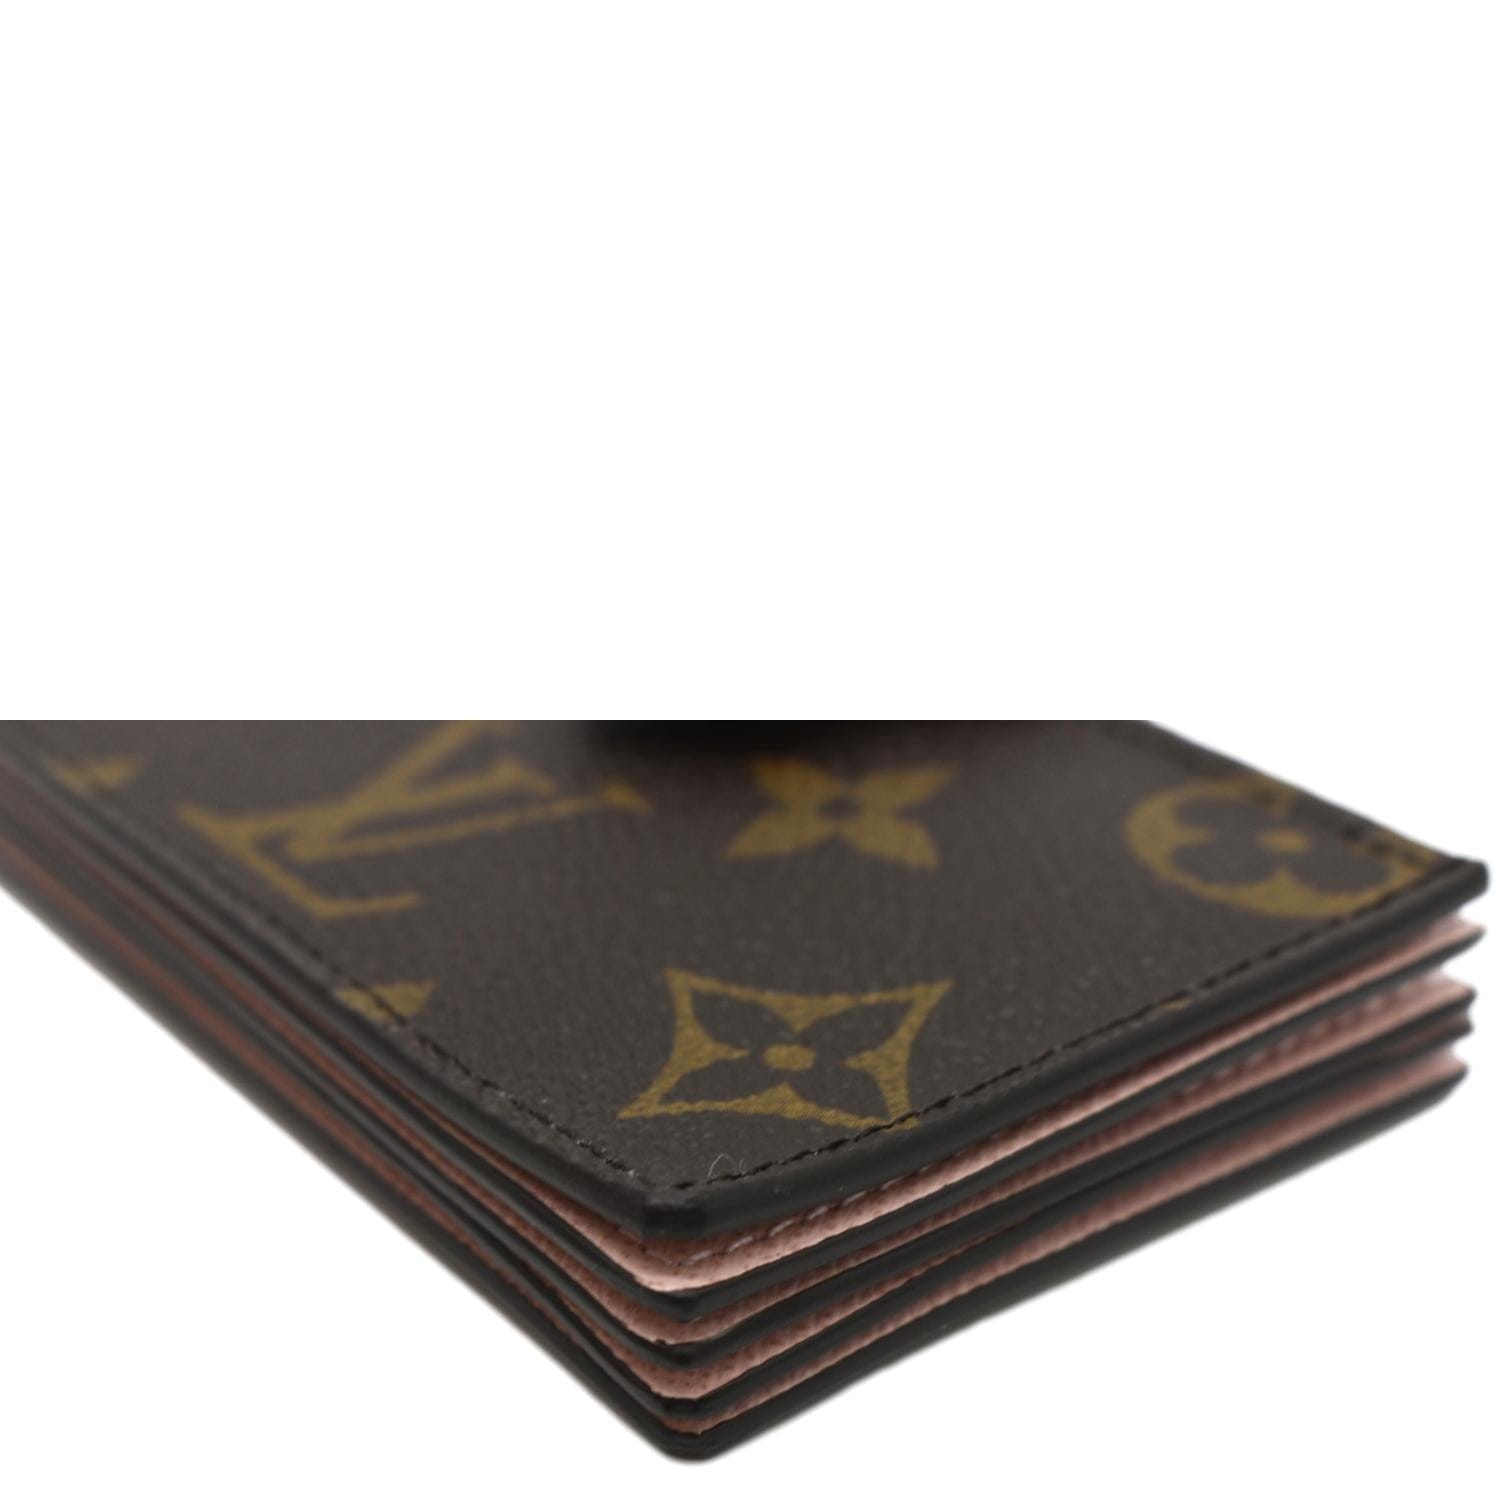 Louis Vuitton, Other, The Gusseted Card Holder